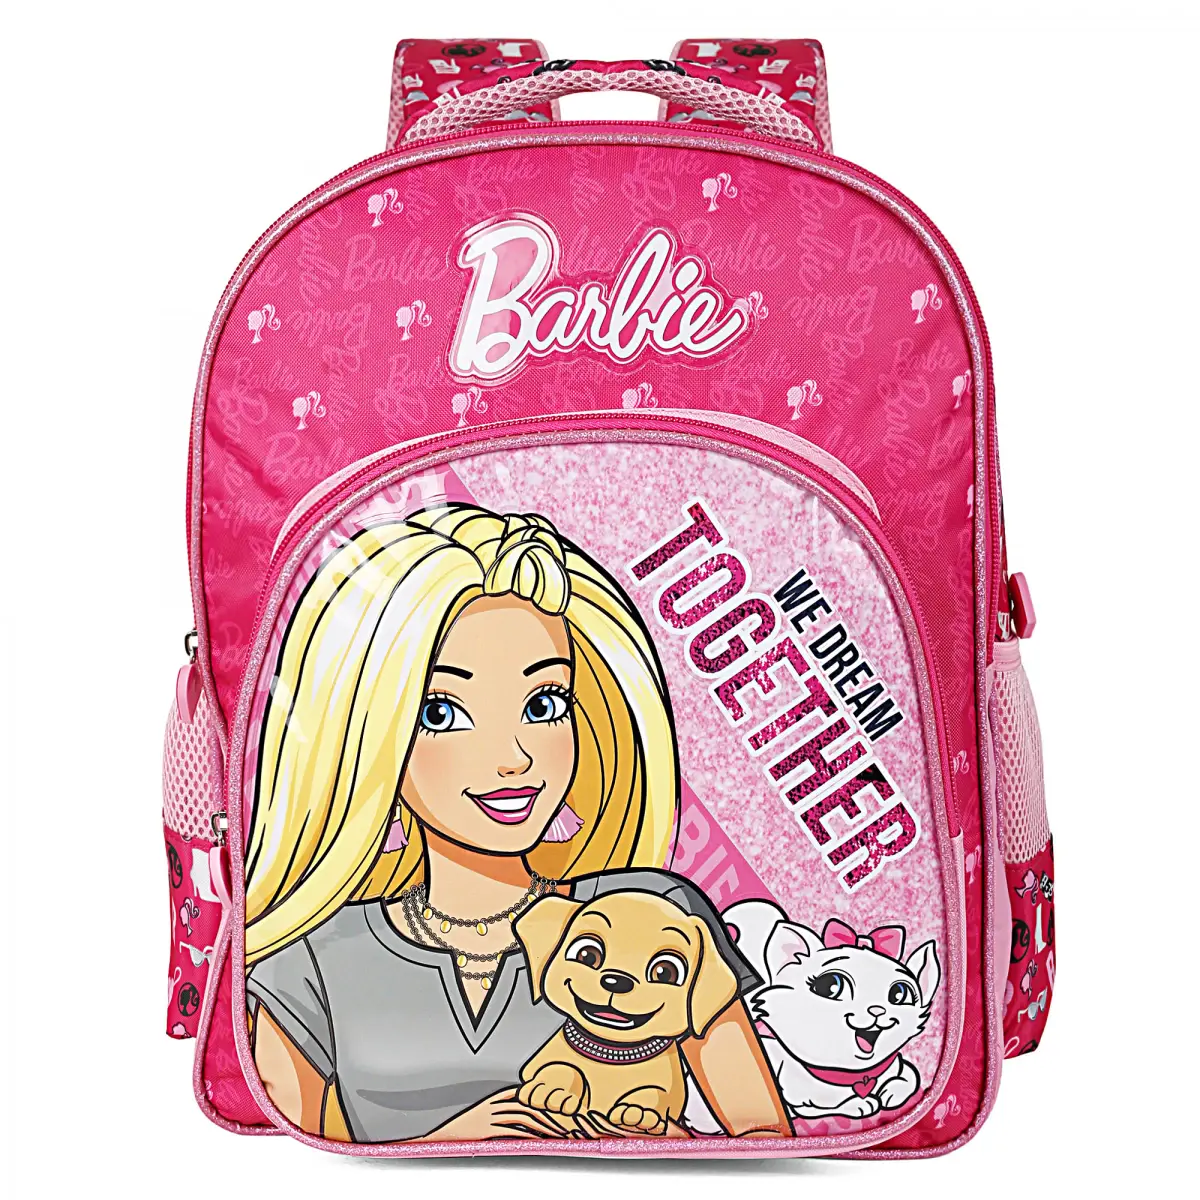 Barbie Together Bag Pack, 14Inches, Pink